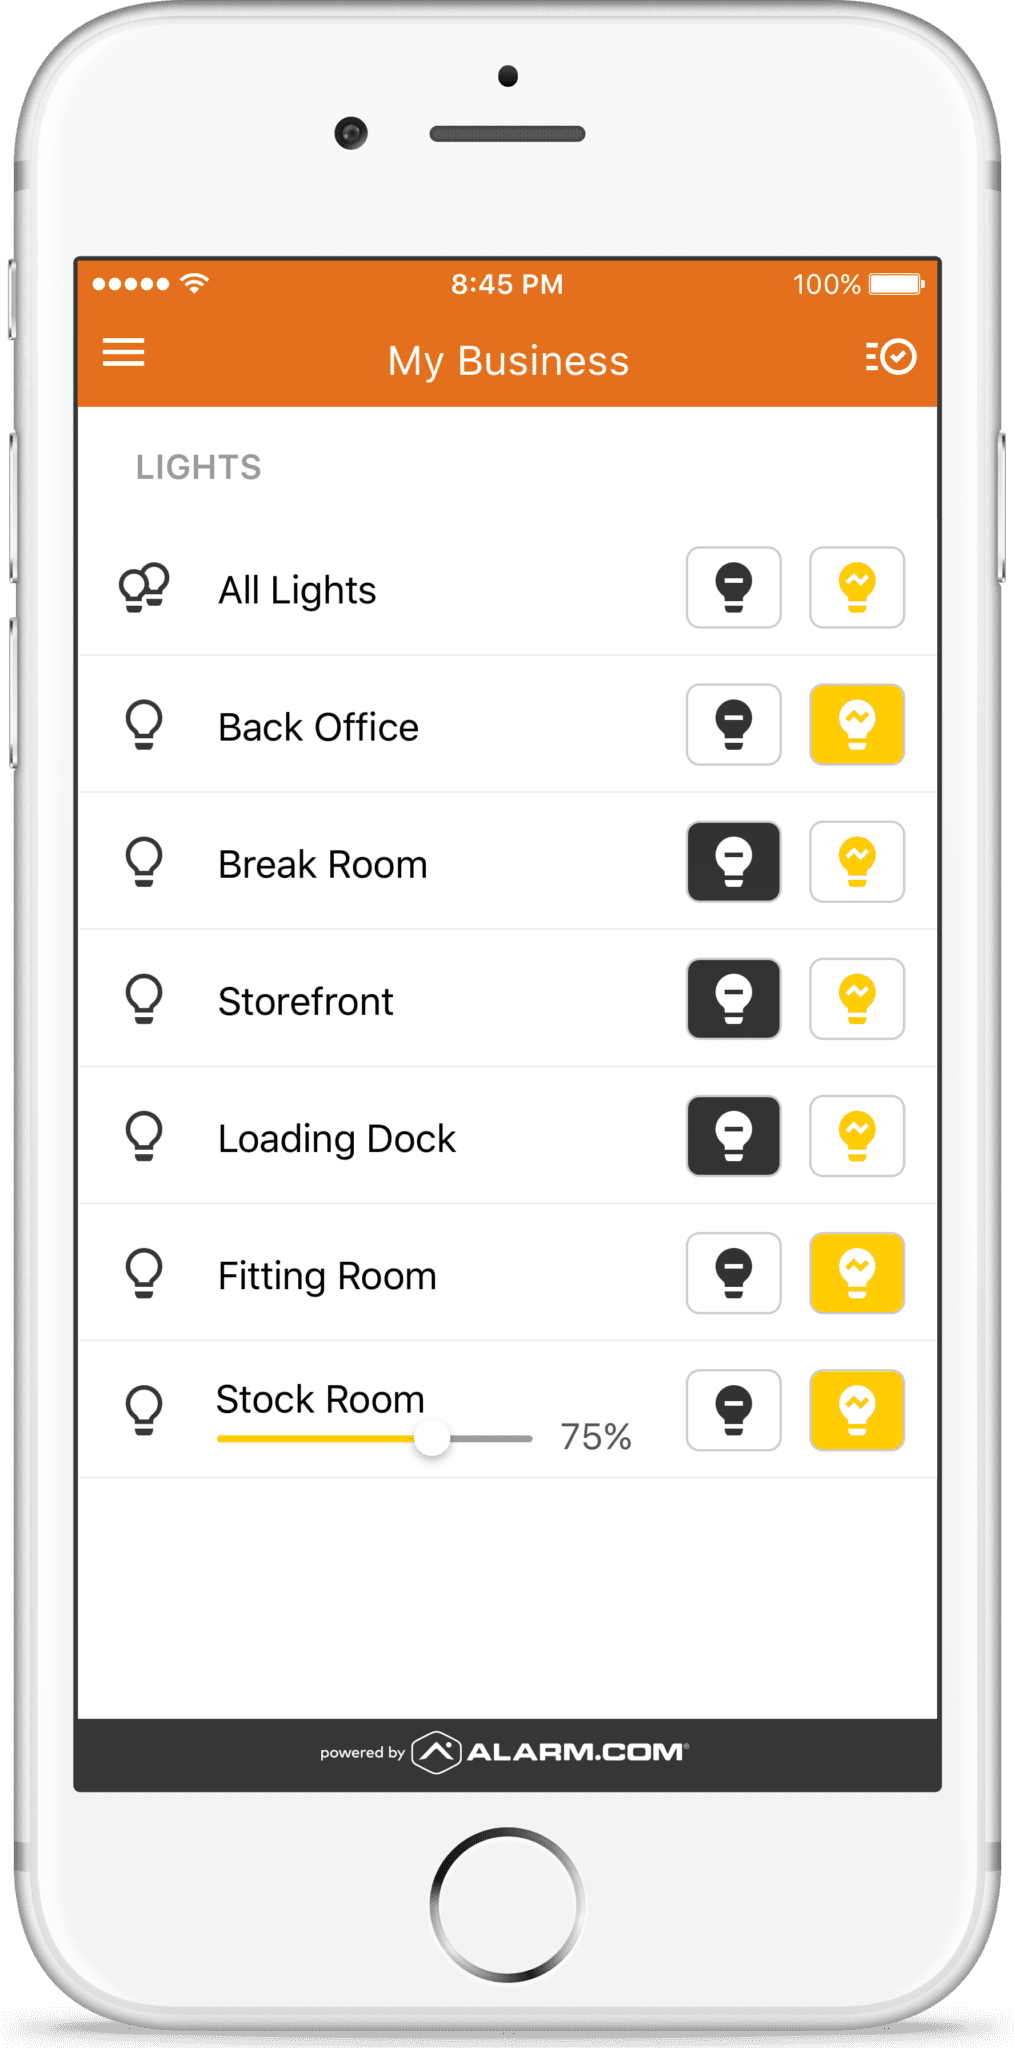 An image of an iPhone showing the MCC Secure, powered by alarm.com, MyBusiness dashboard that gives business owners the ability to turn lights on/off remotely from anywhere.